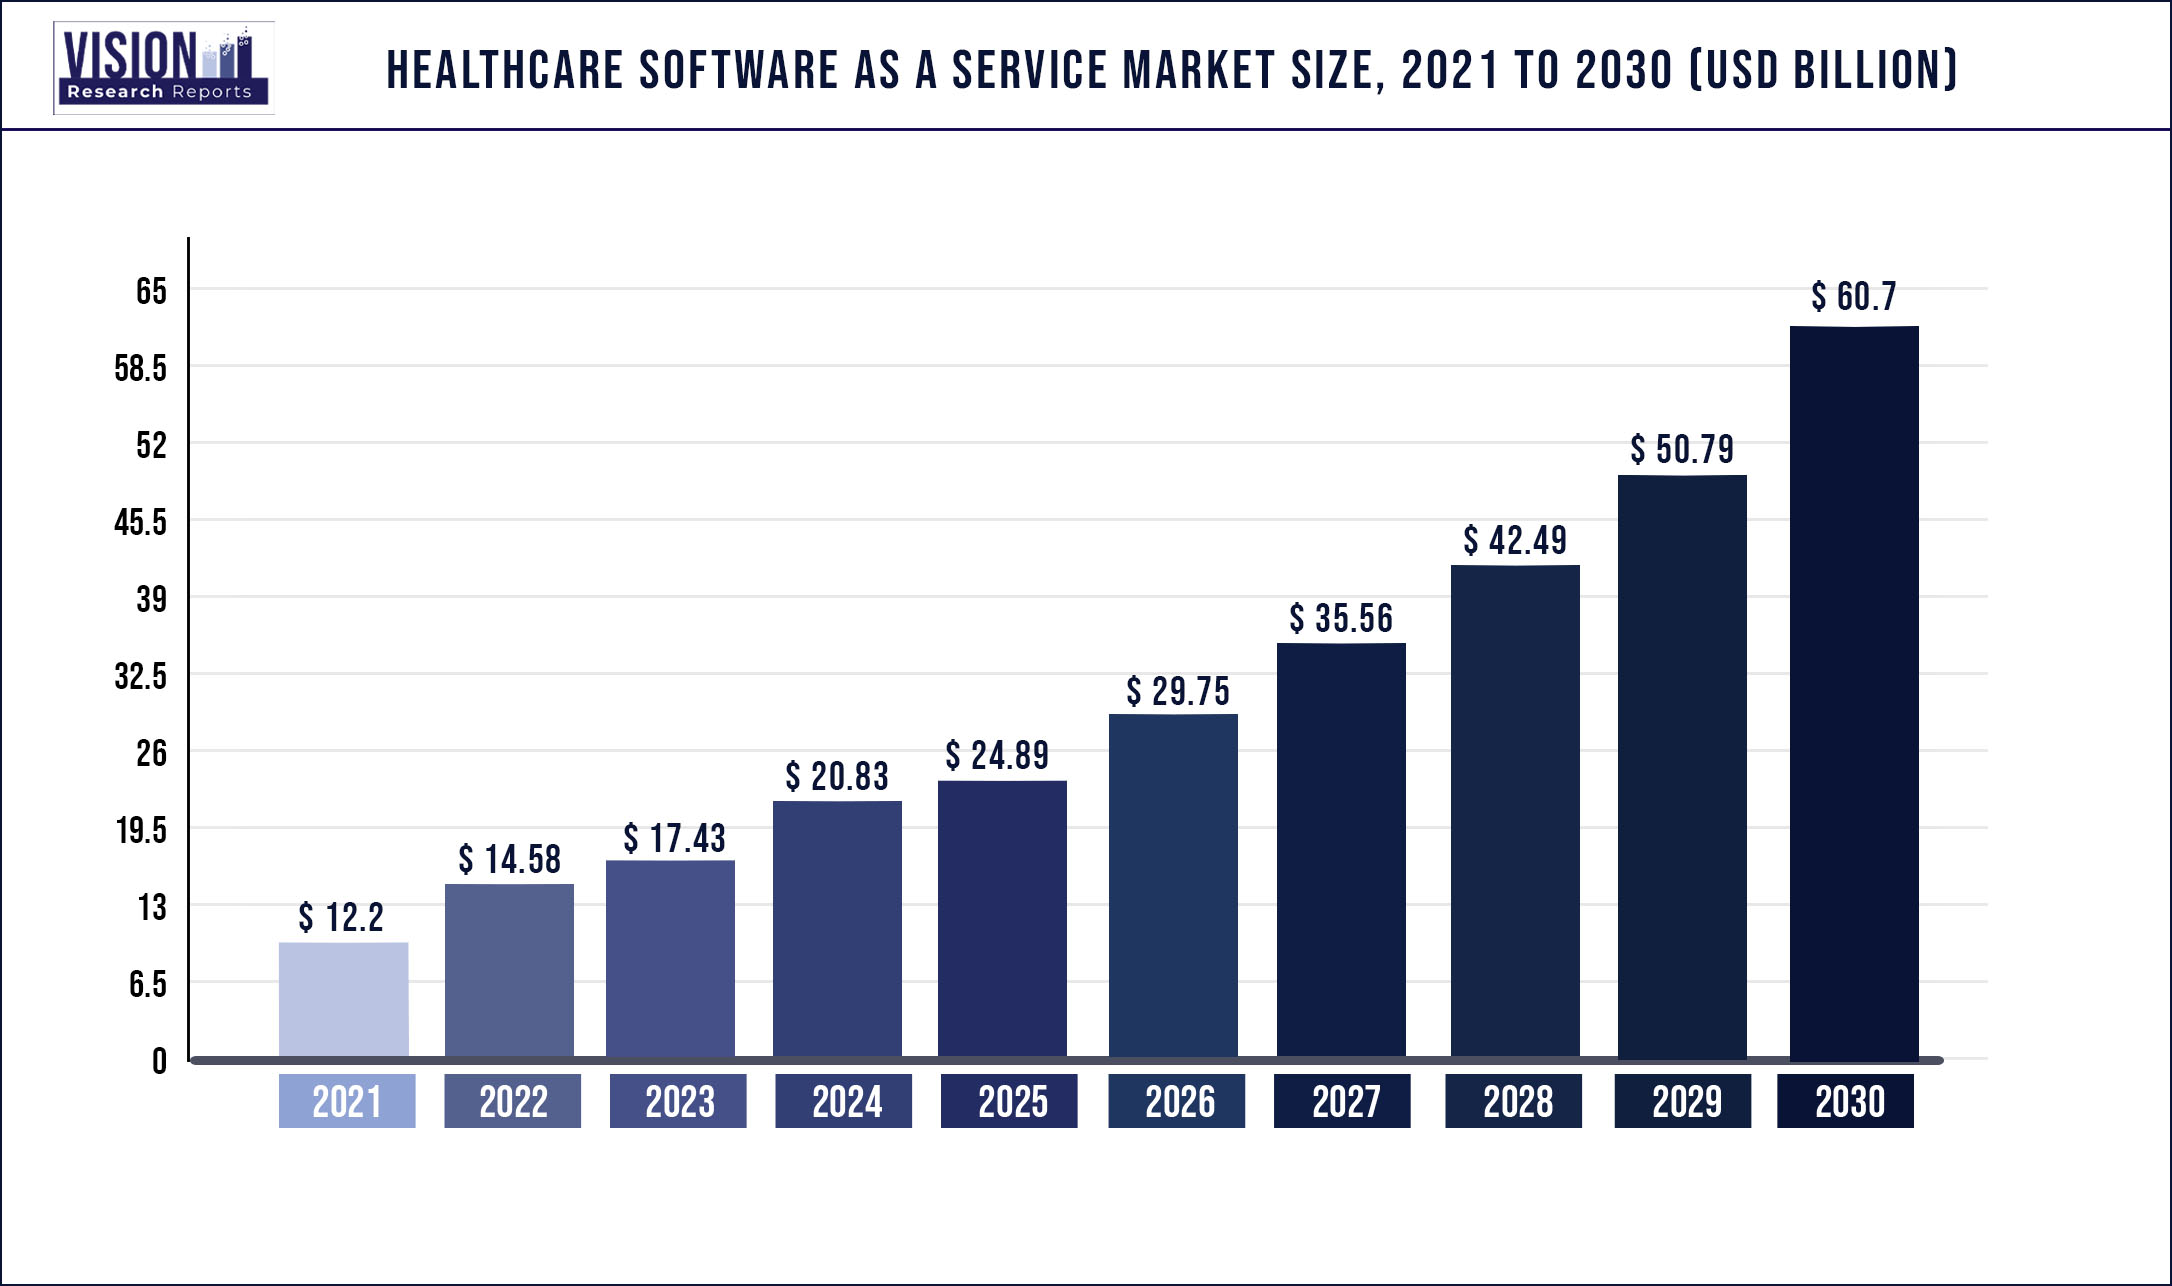 Healthcare Software As A Service Market Size 2021 to 2030